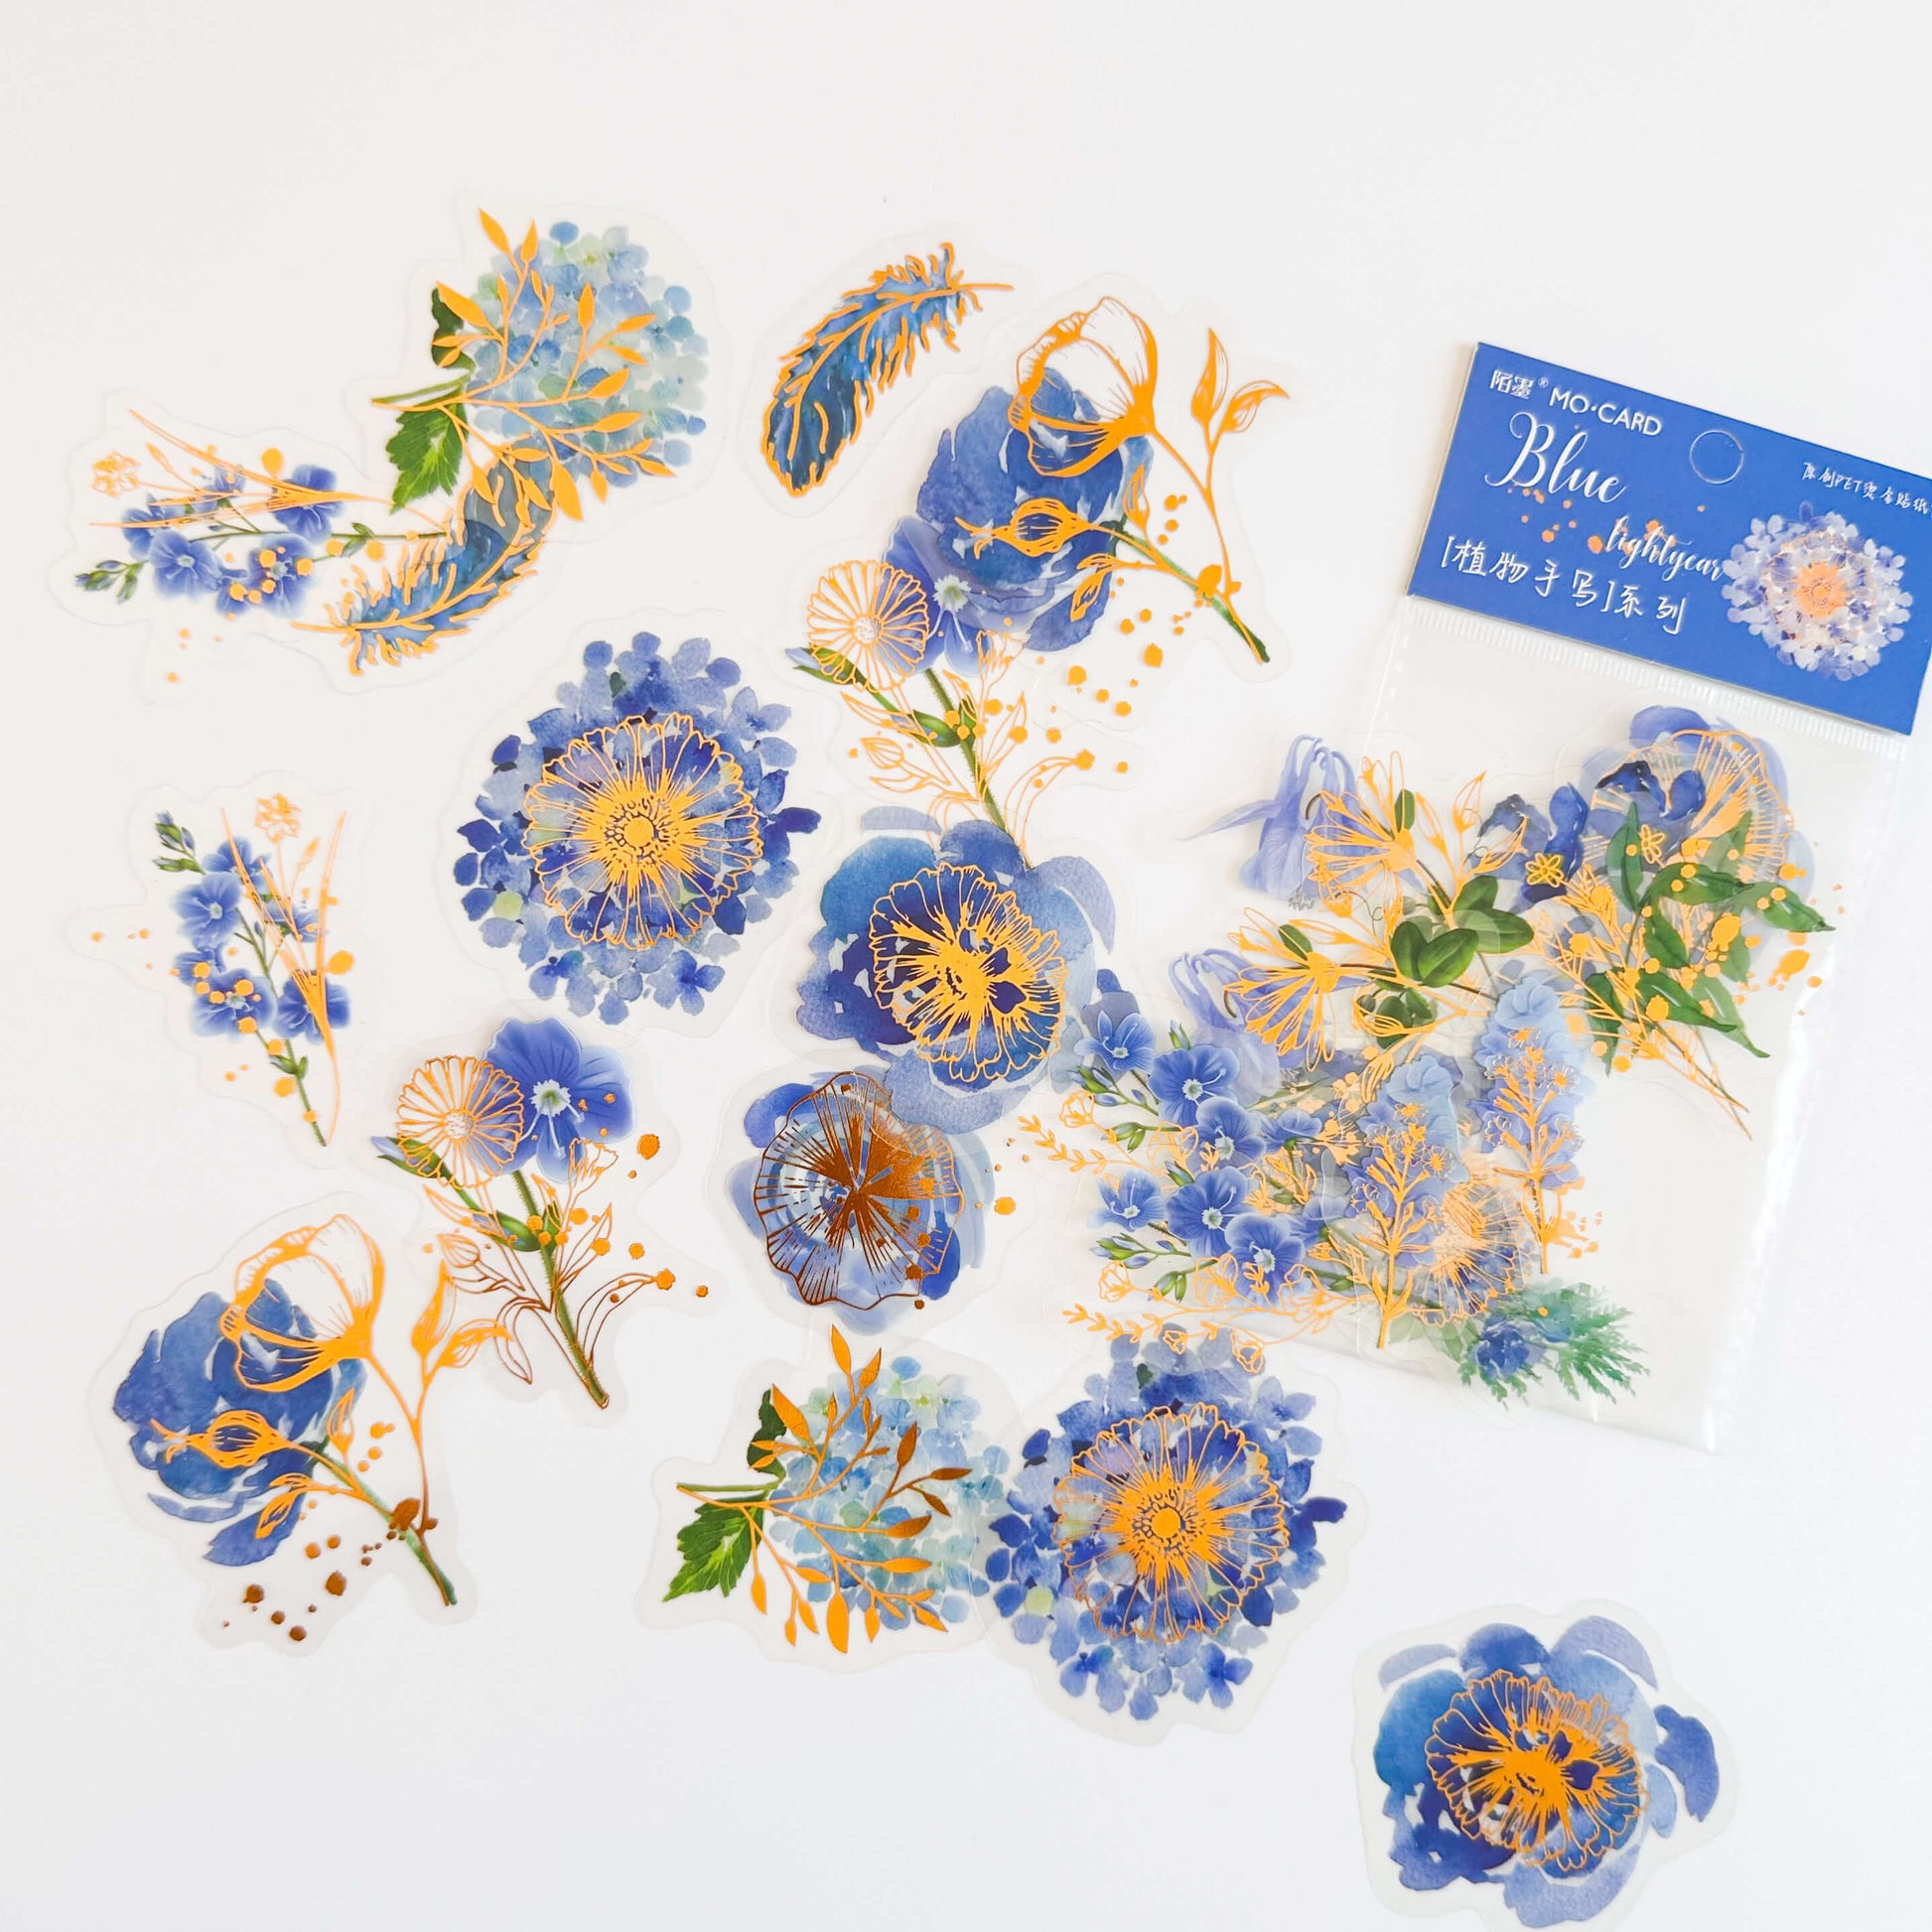 Blue and gold detail flower sticker pack with sticker packaging.